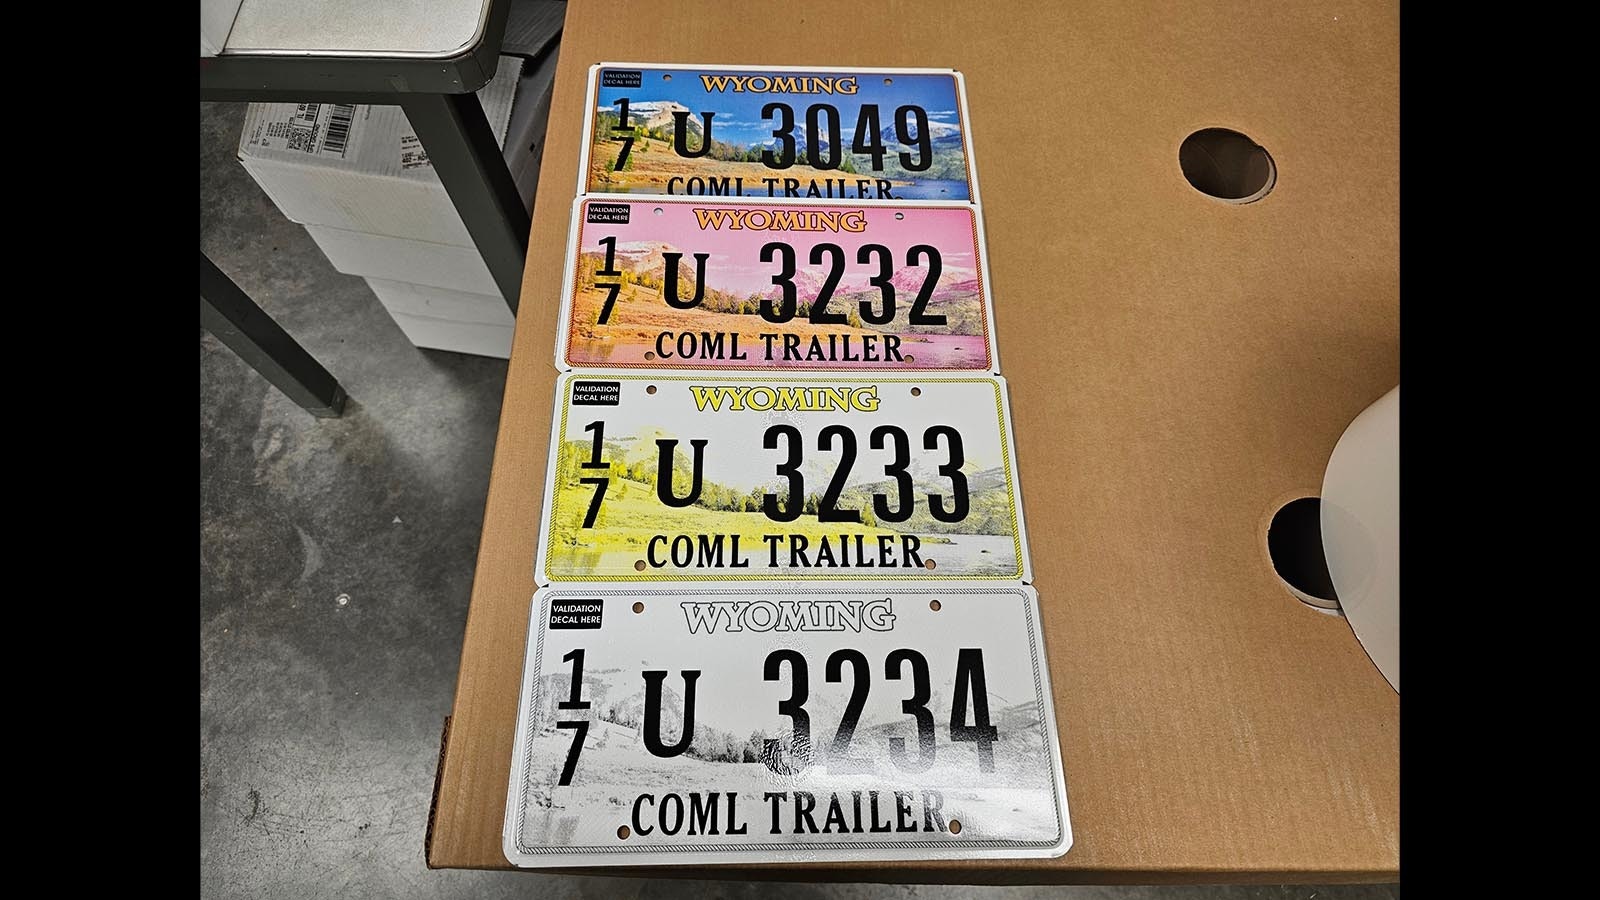 Wyoming license plates are actually a composite of four colors which, when overlaid on each other, makes the final color and design.